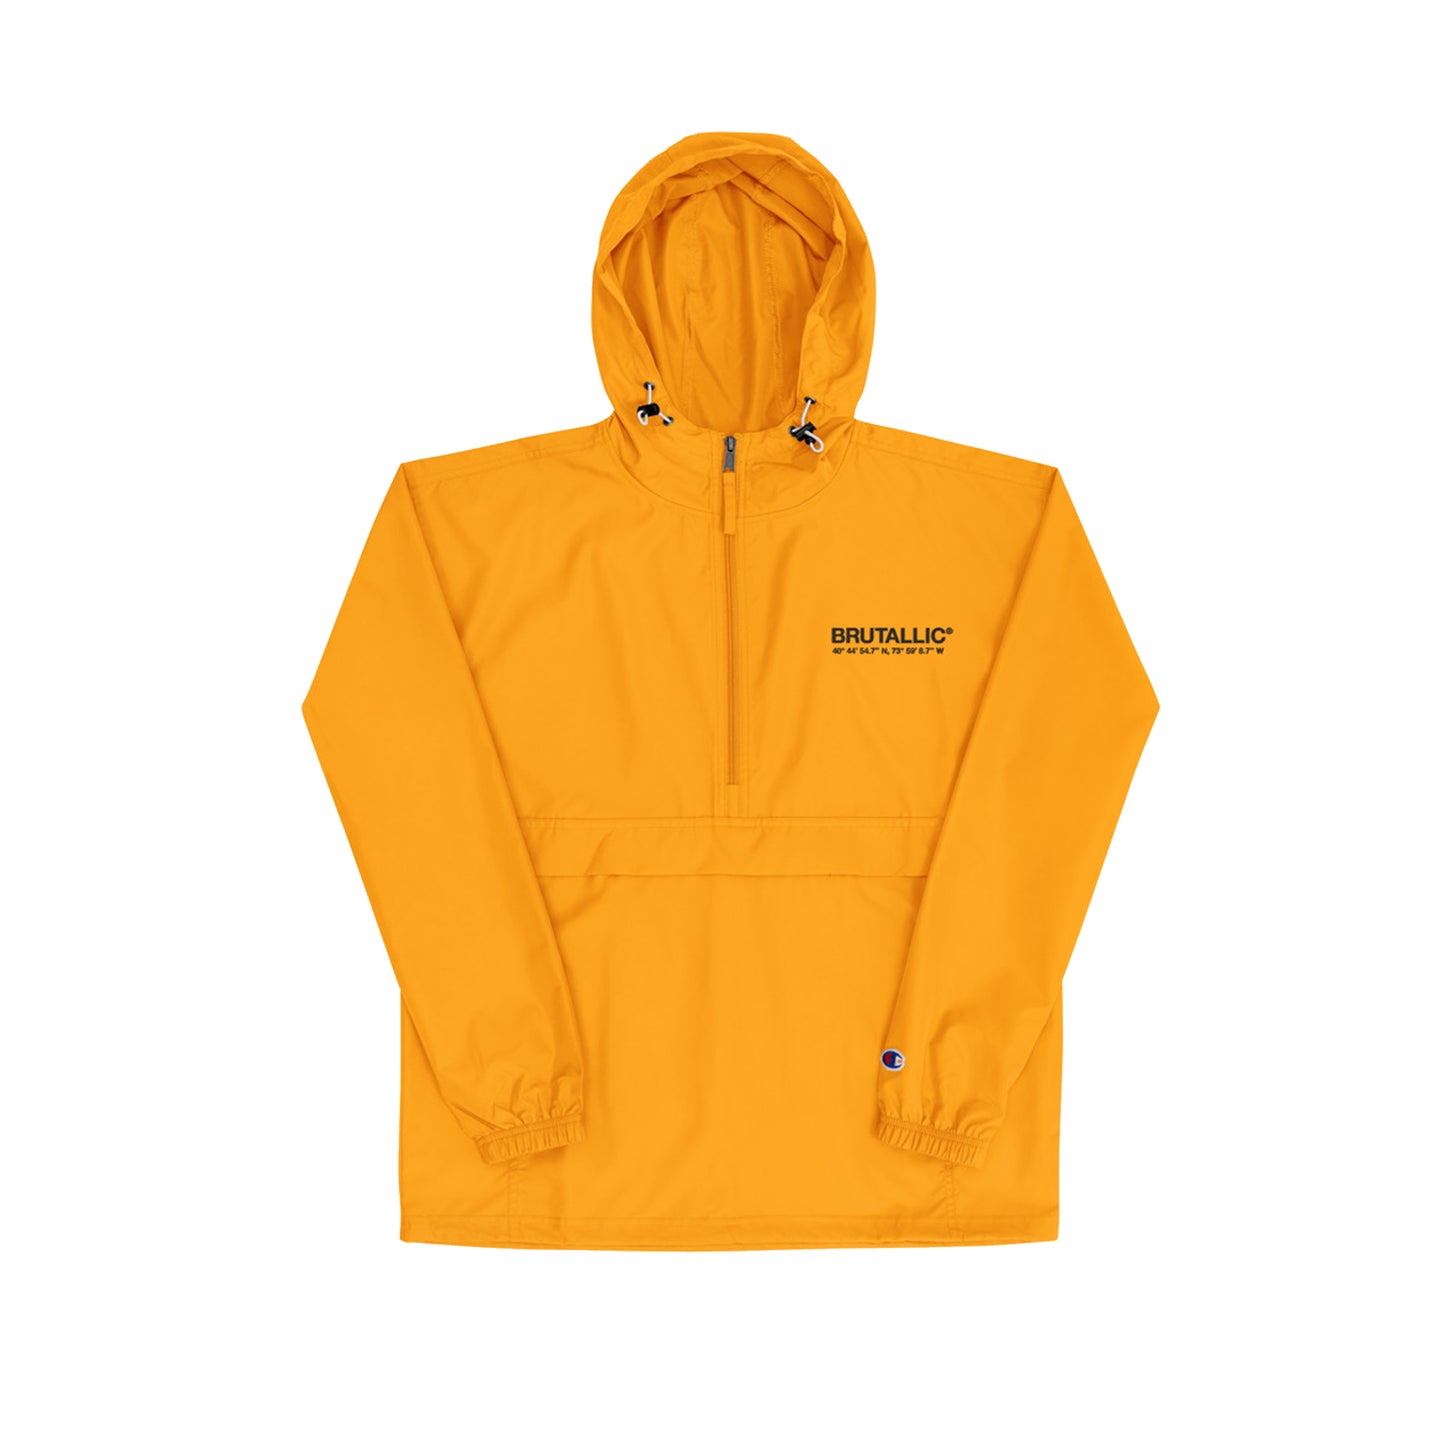 CHAMPION PACKABLE JACKET - GOLD